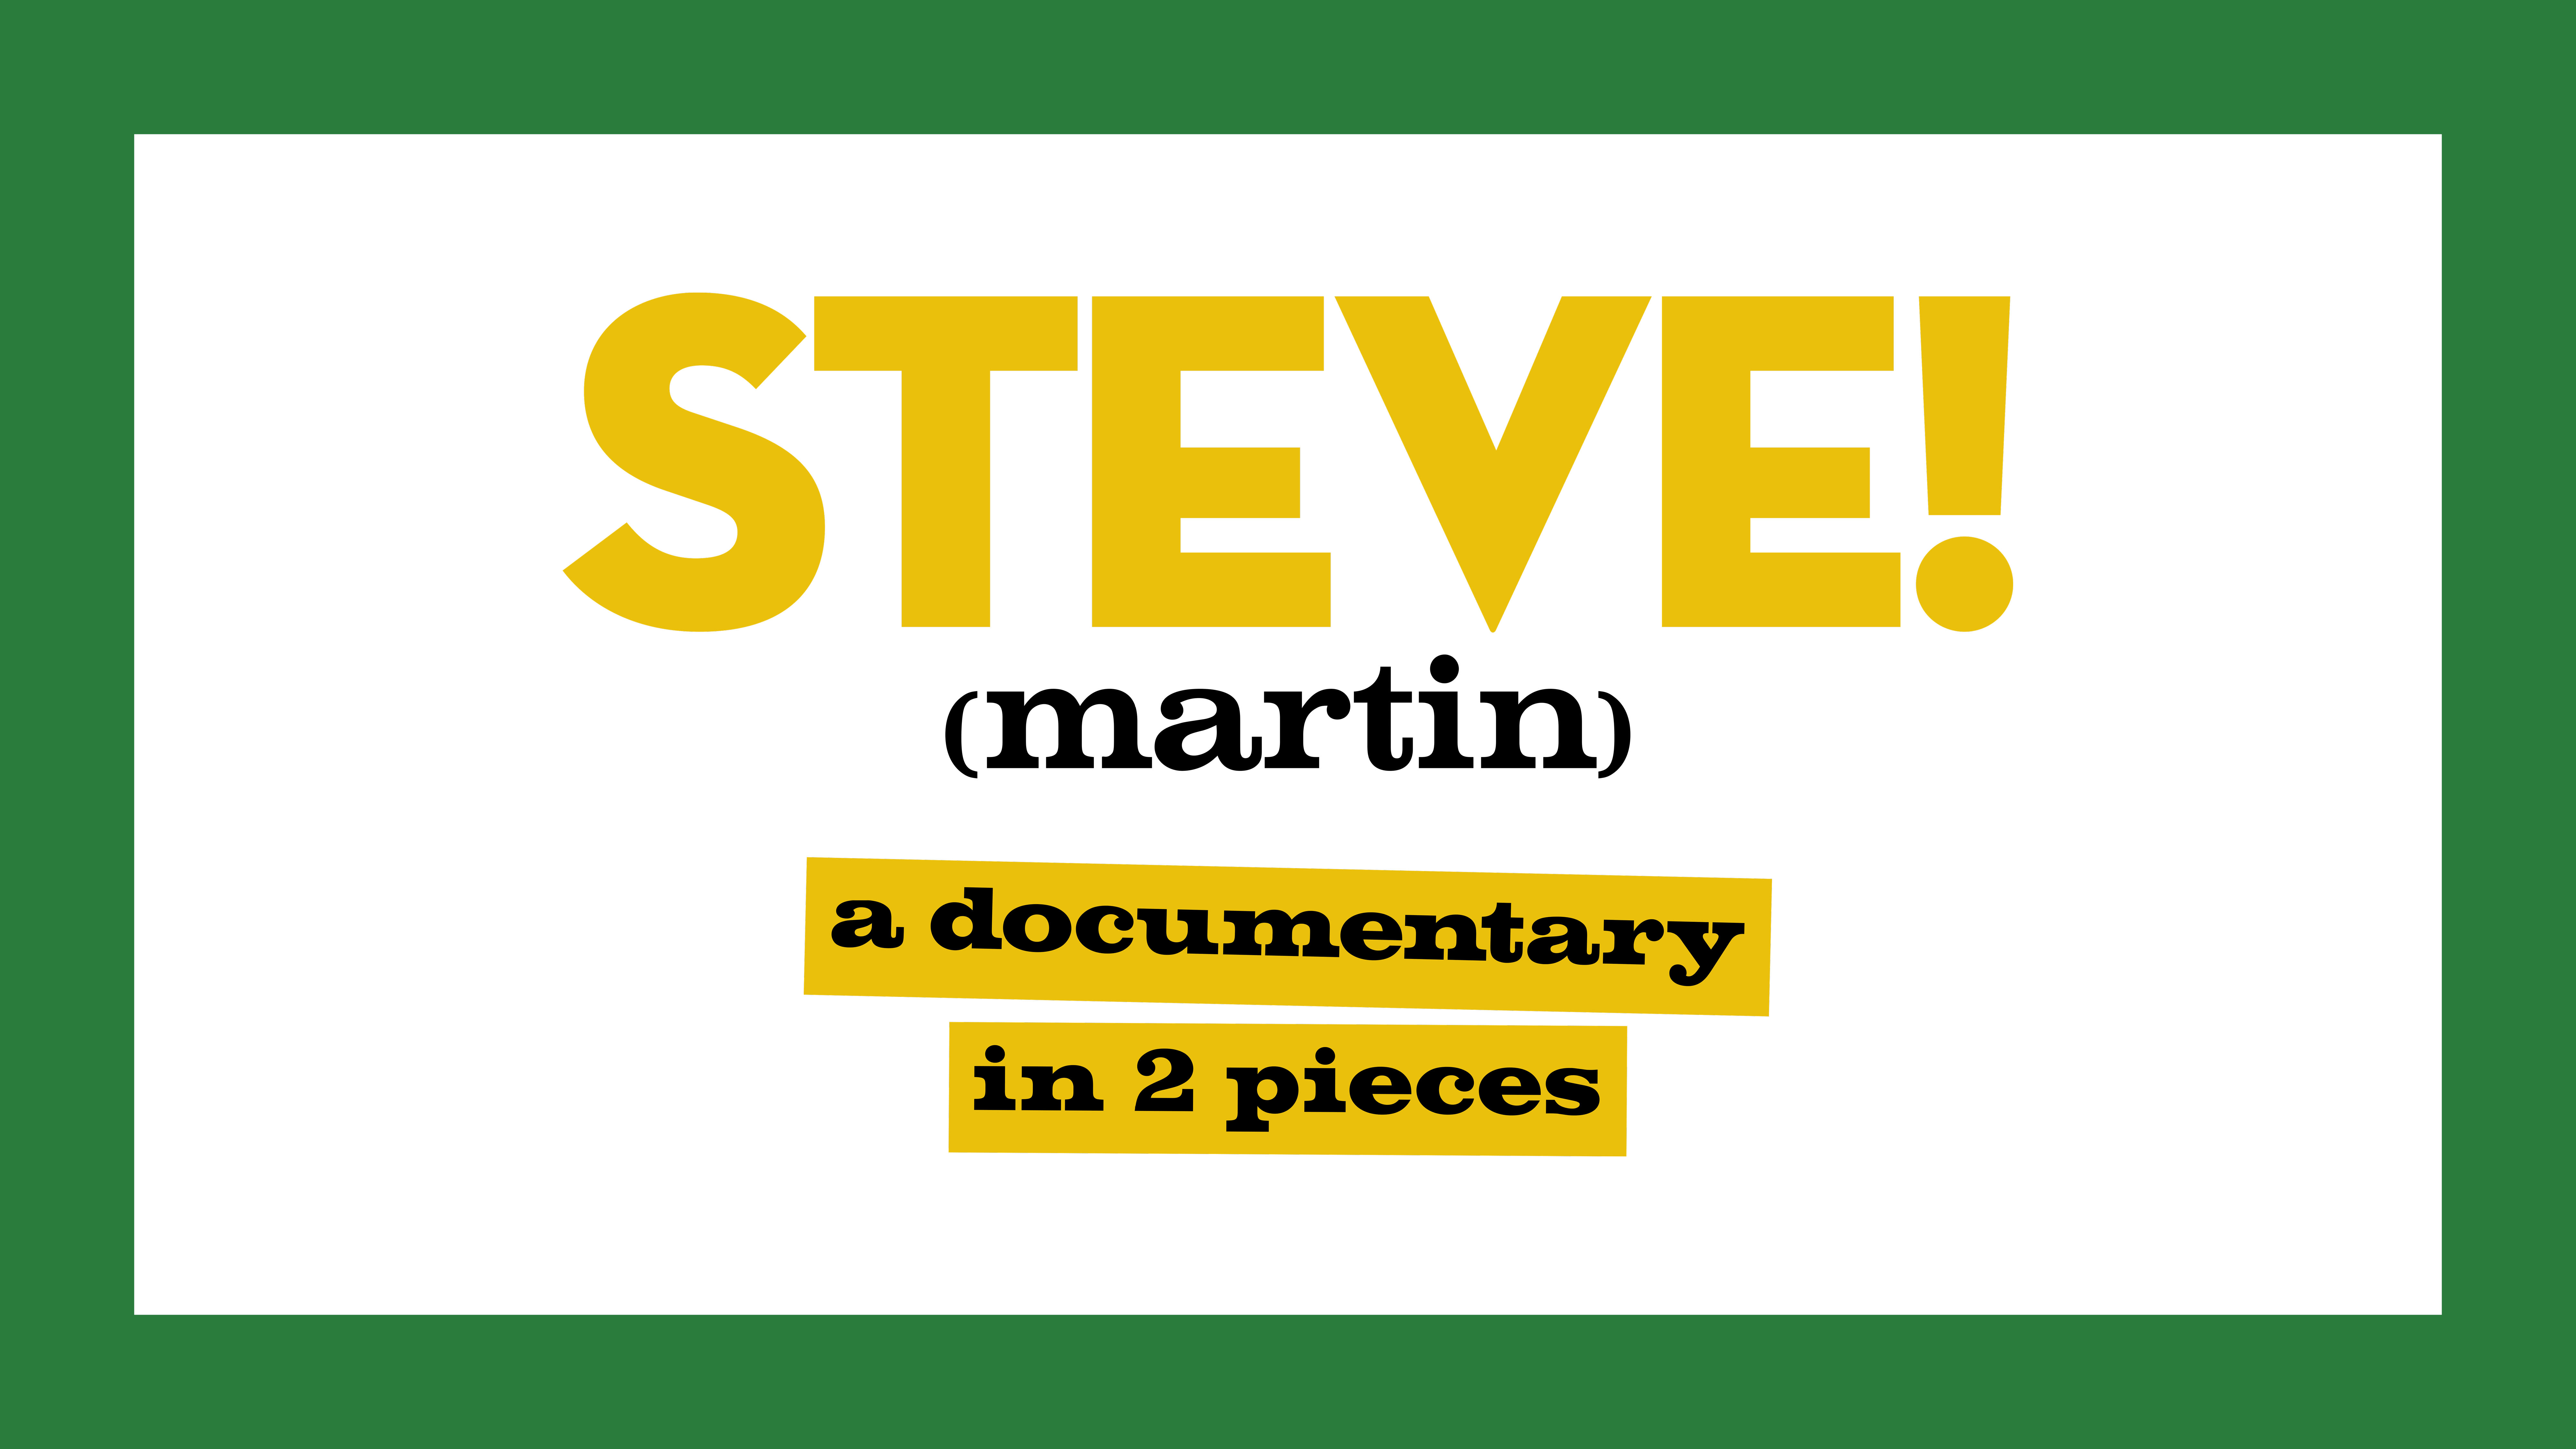 ... Going To Care”: How Steve Martin Overcame Doubters To Reach Comedy Heights – Contenders TV: Doc + Unscripted